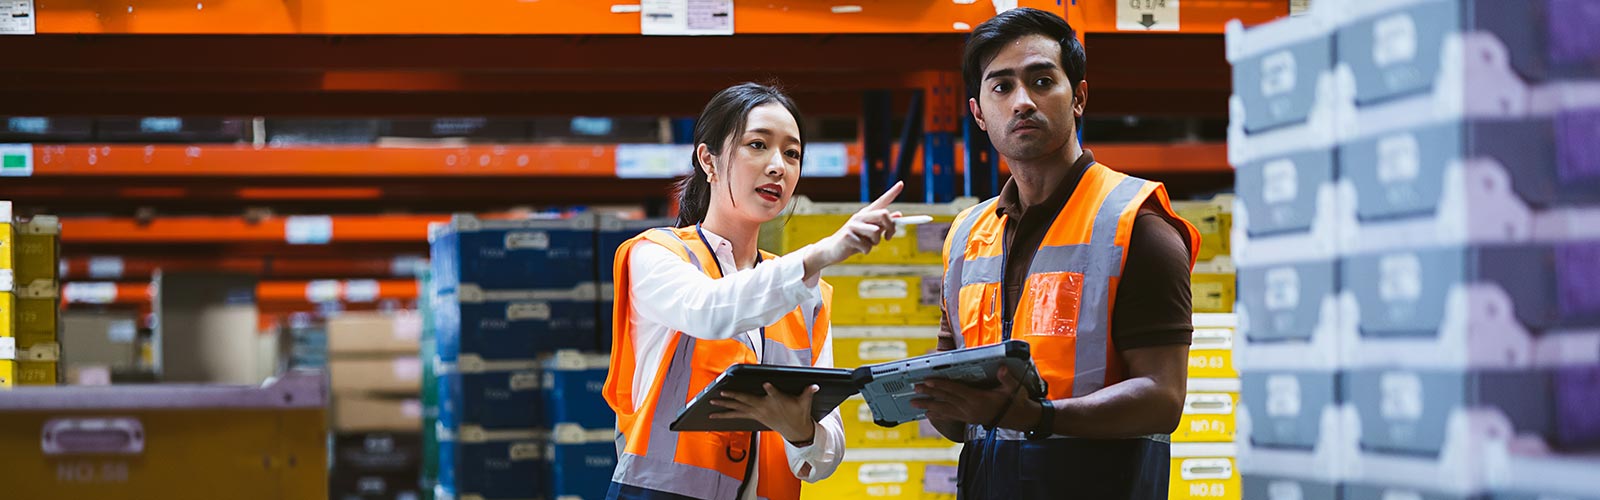 supply chain managers inspecting an outbound load and pointing to an error found using supply chain management software